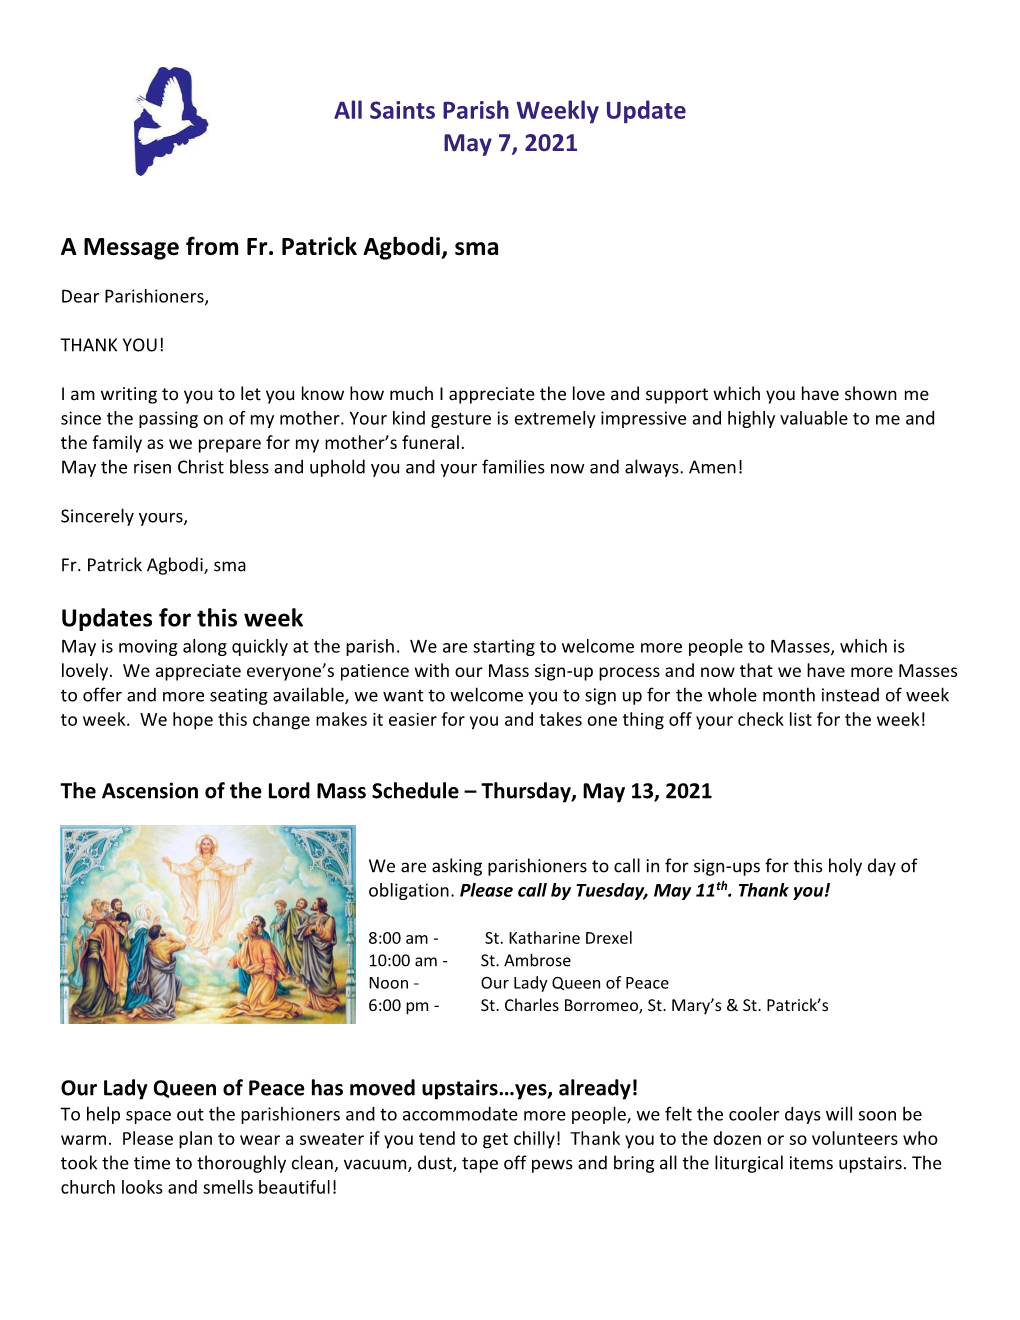 All Saints Parish Weekly Update May 7, 2021 a Message from Fr. Patrick